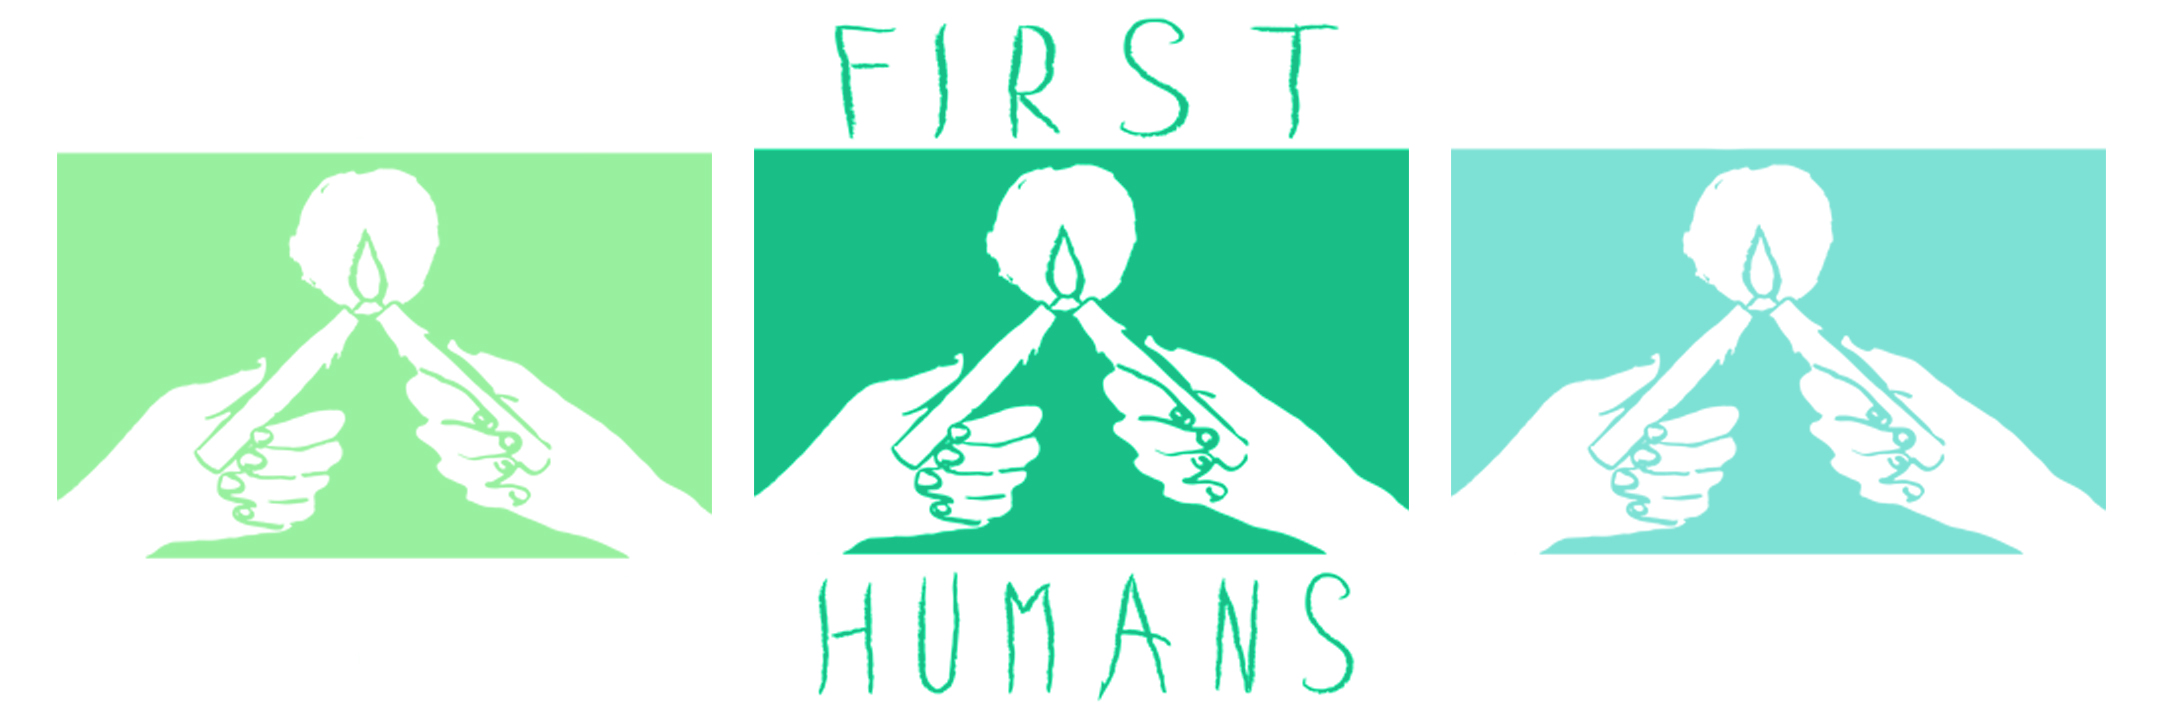 First Humans Records